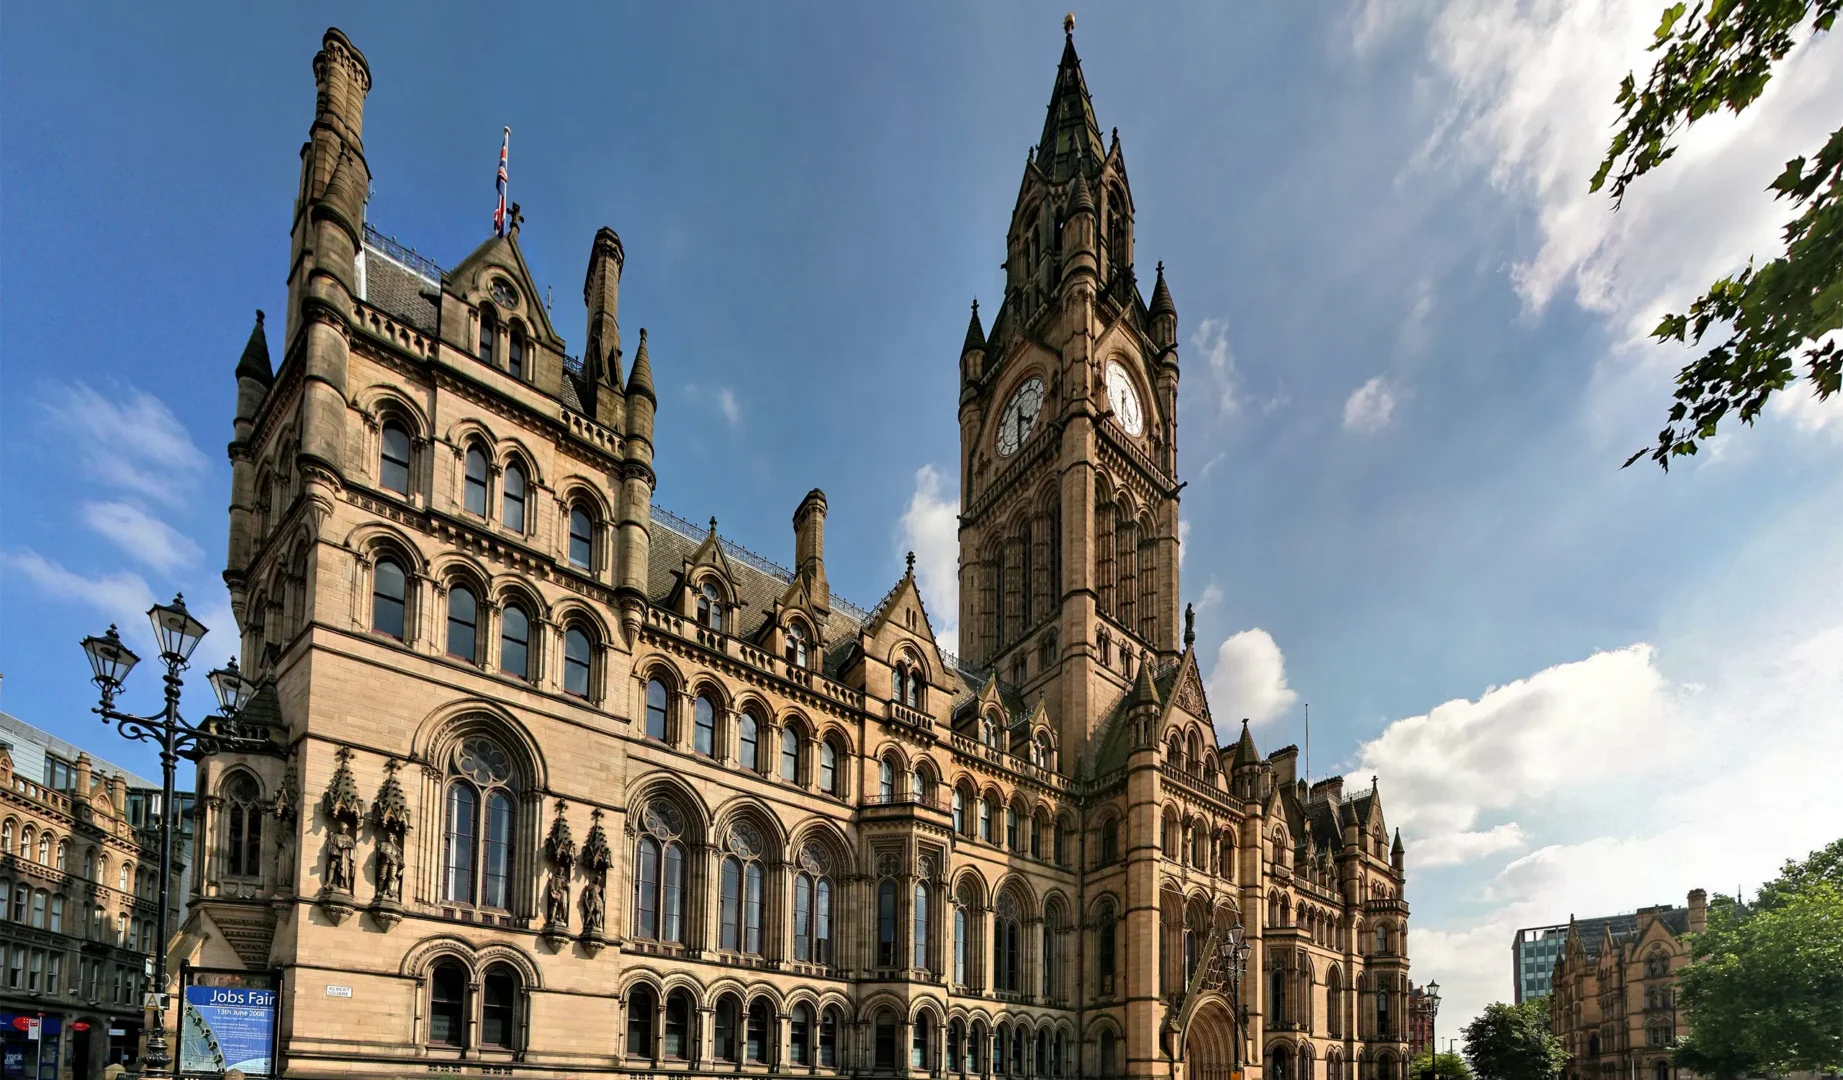 Manchester_town_hall